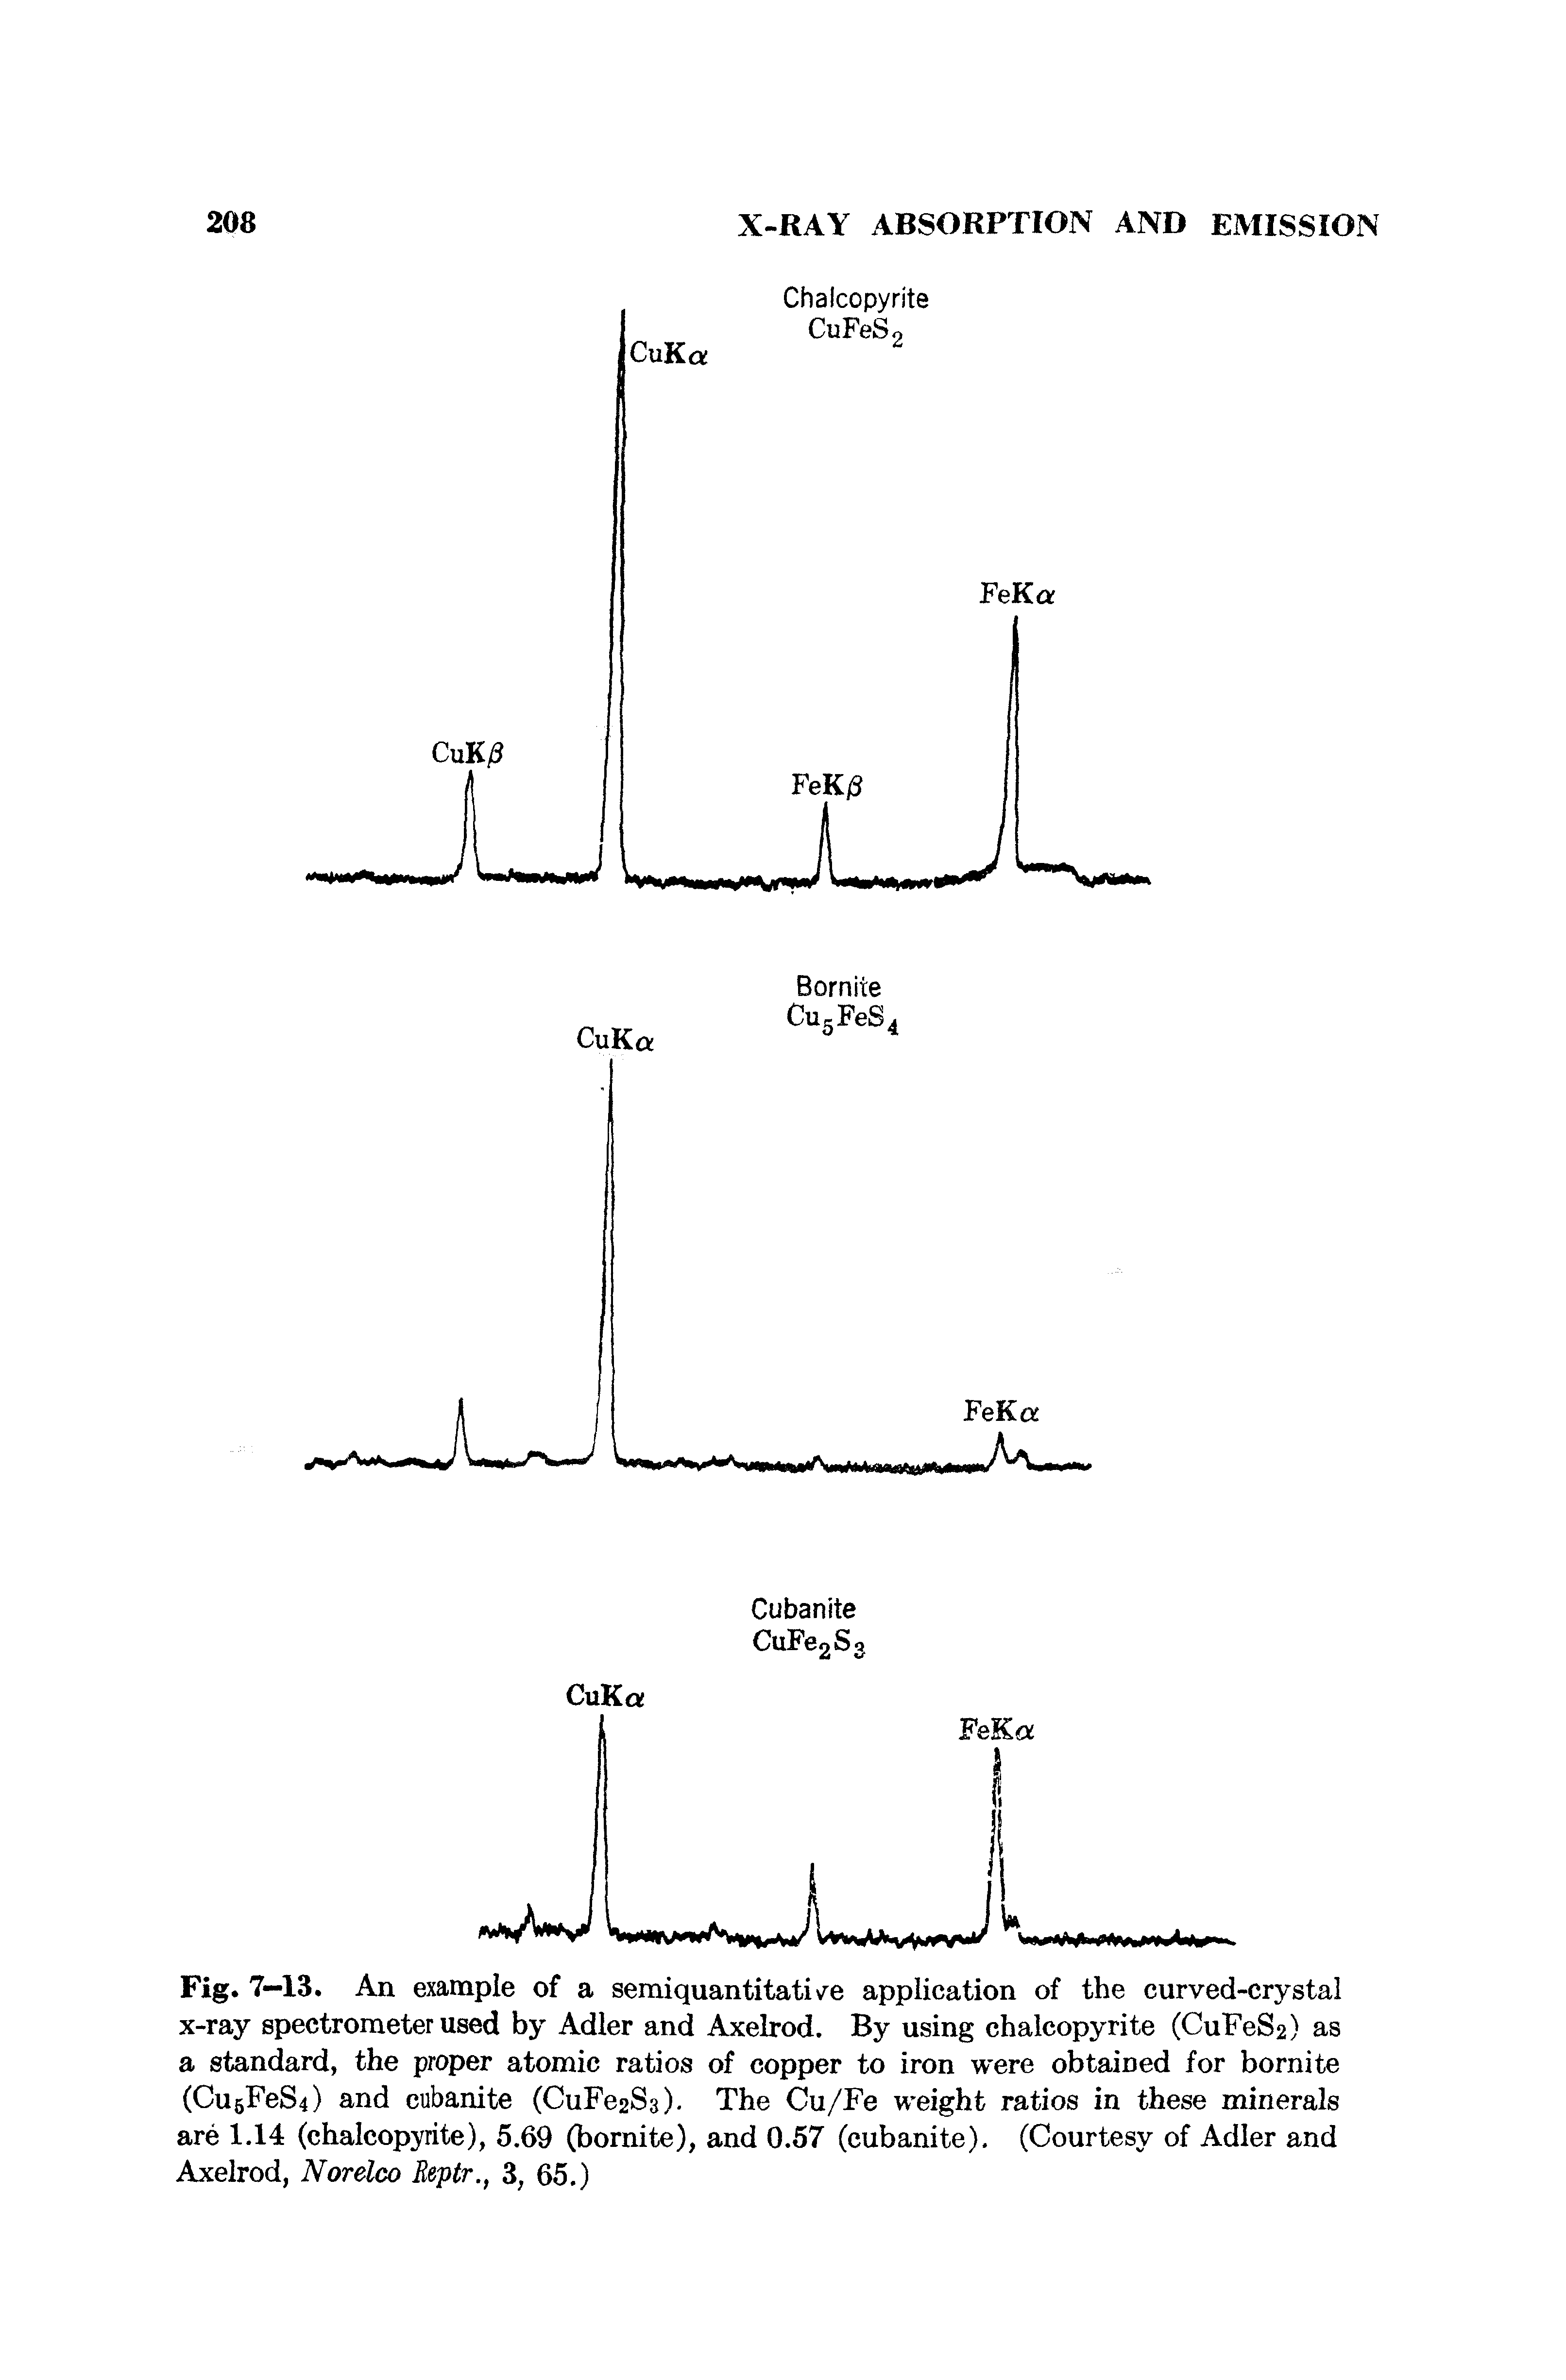 Fig. 7-13. An example of a semiquantitati e application of the curved-crystal x-ray spectrometer used by Adler and Axelrod. By using chalcopyrite (CuFeS2) as a standard, the proper atomic ratios of copper to iron were obtained for bornite (Cu5FeS4) and cubanite (CuFe2S3). The Cu/Fe weight ratios in these minerals are 1.14 (chalcopyrite), 5.69 (bornite), and 0.57 (cubanite). (Courtesy of Adler and Axelrod, Norelco Reptr., 3, 65.)...